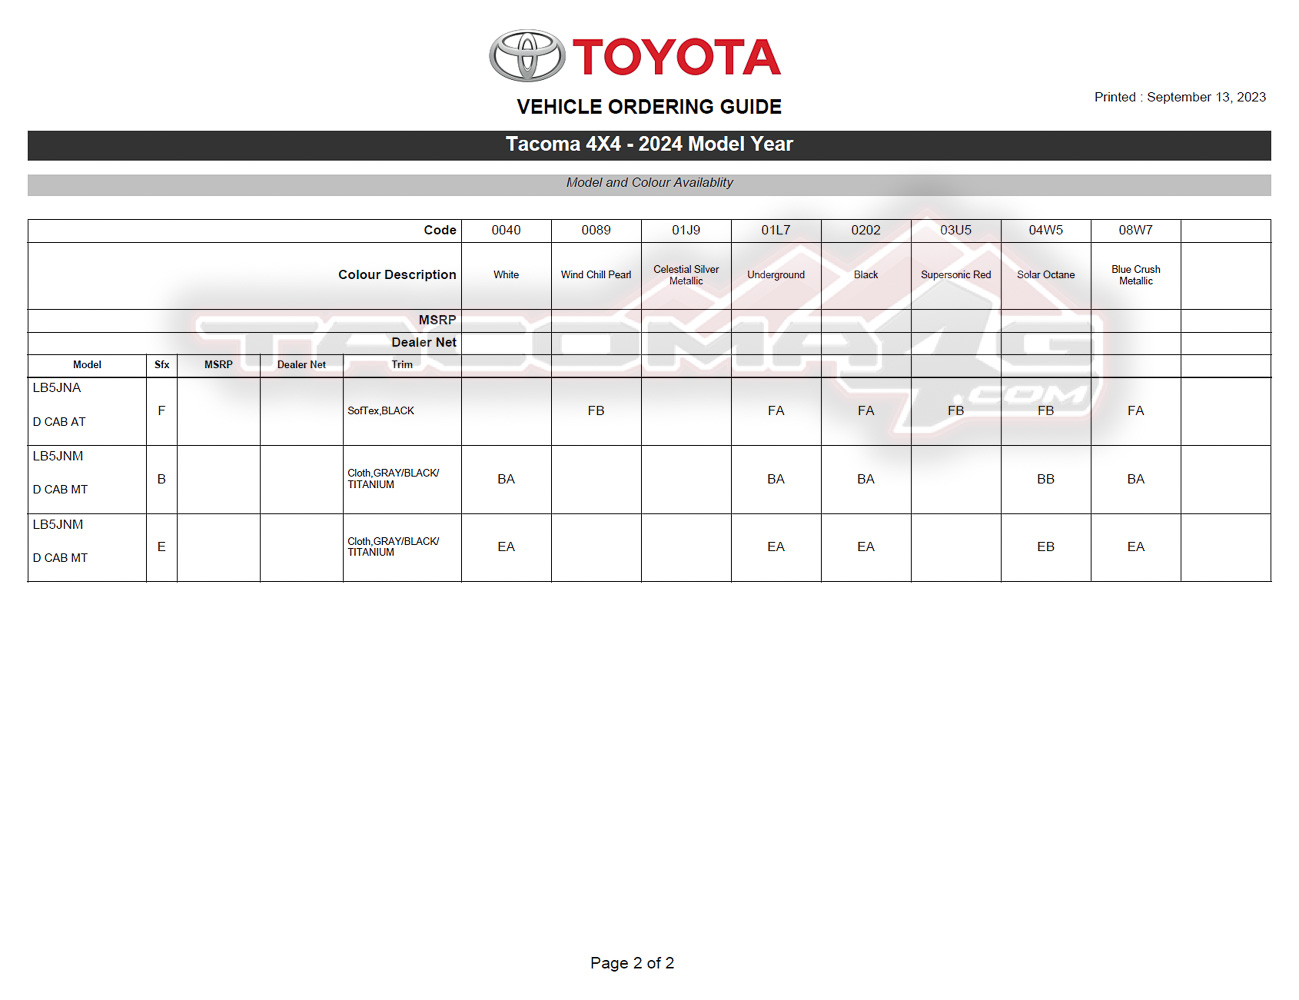 2024 Tacoma 2024 Tacoma Ordering Guide for Canada [Updated w/ Tacoma HYBRID i-Force MAX Models & Specs - Trailhunter, TRD Pro, Off-Road Premium, Limited] 2024-tacoma-order-guide-canada-10